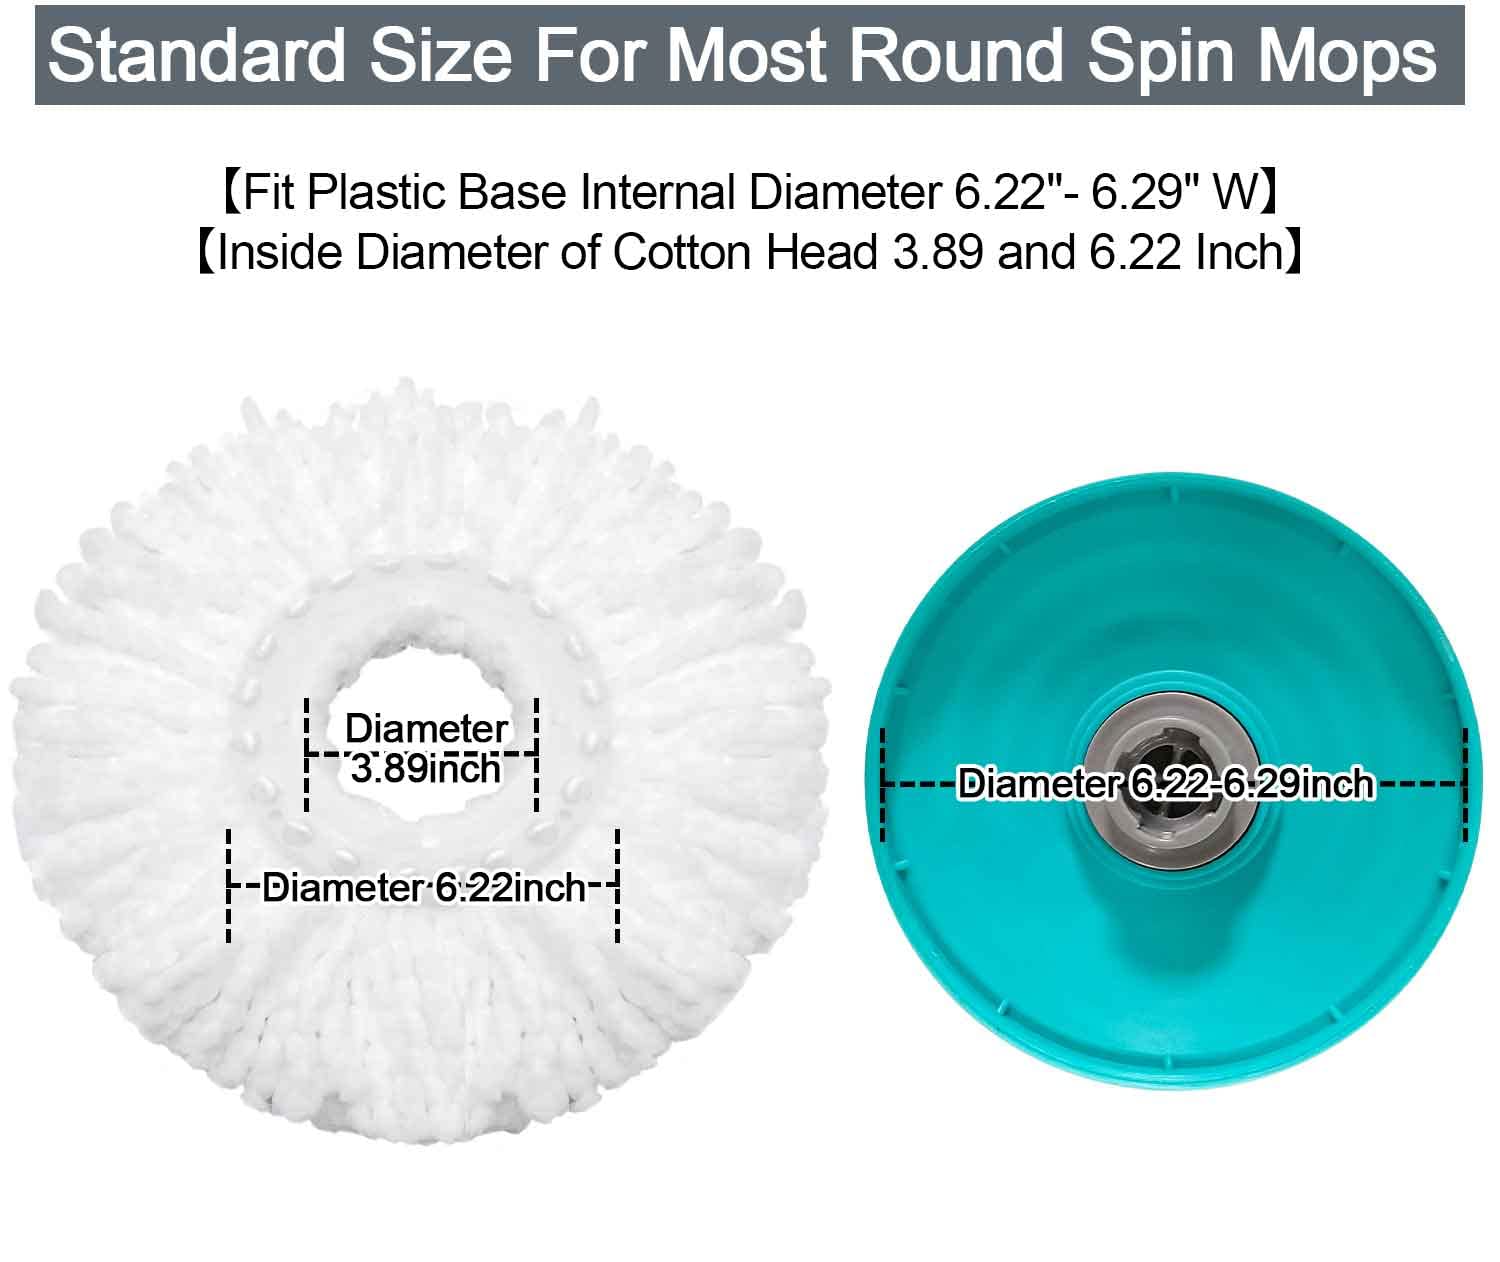 Tsmine Spin Mop Replacement Head - Microfiber Mop Heads Refills for Universal Spin Mop Floor Cleaning , Standard Replacement for Tsmine, for Hurricane, for Mopnado Round Shape Spin Mop Handle